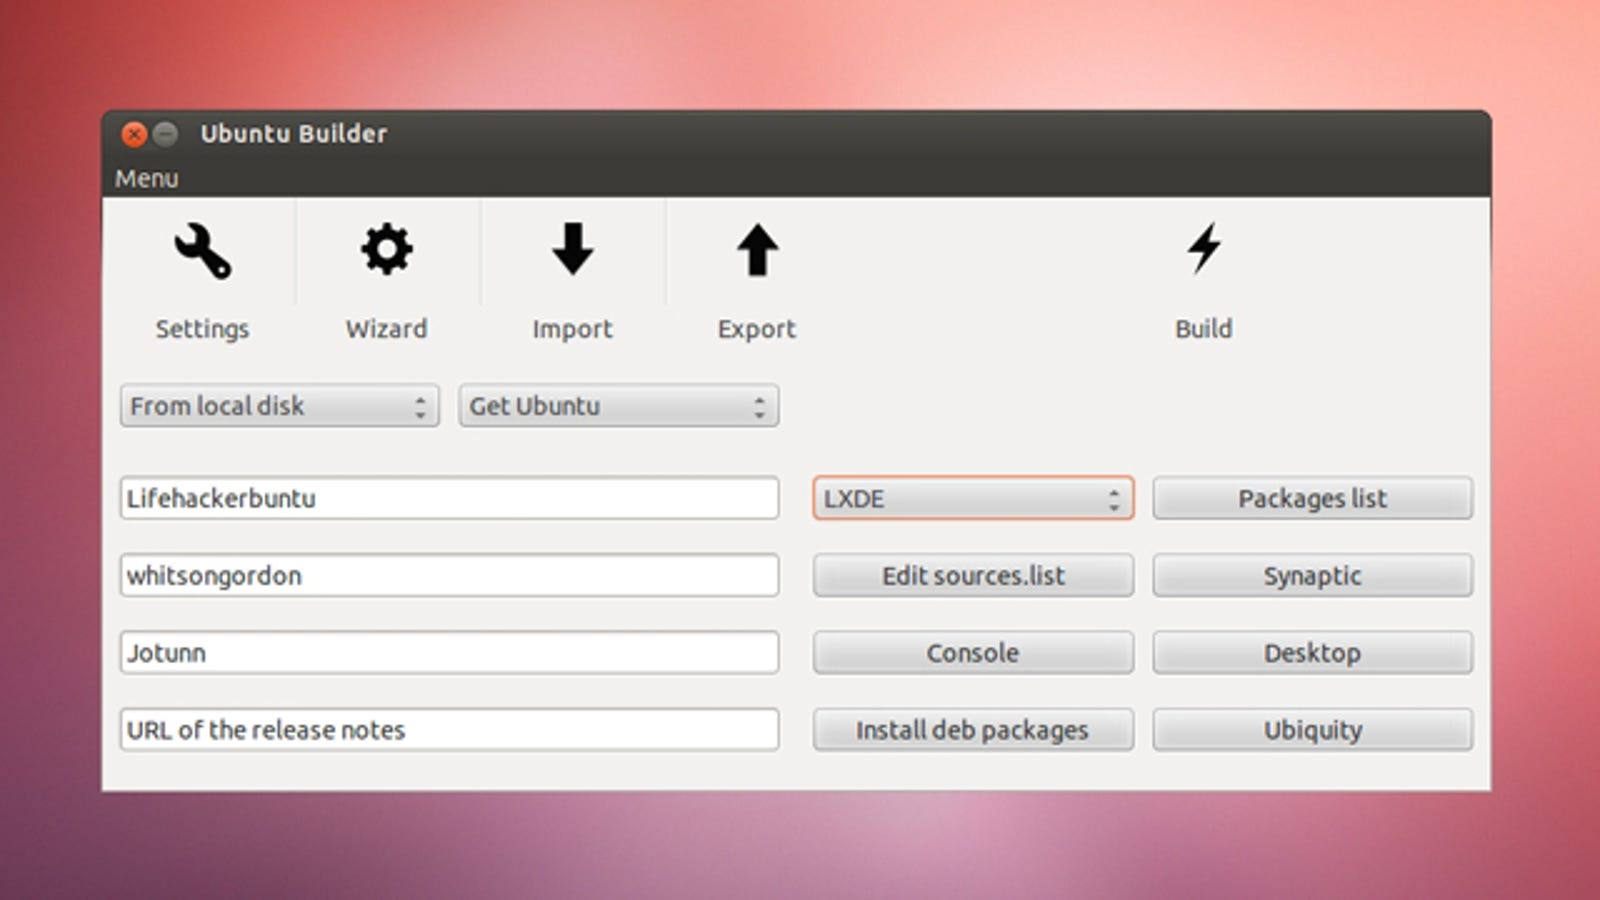 Ubuntu Builder Lets You Build Your Own Customized Linux Distribution